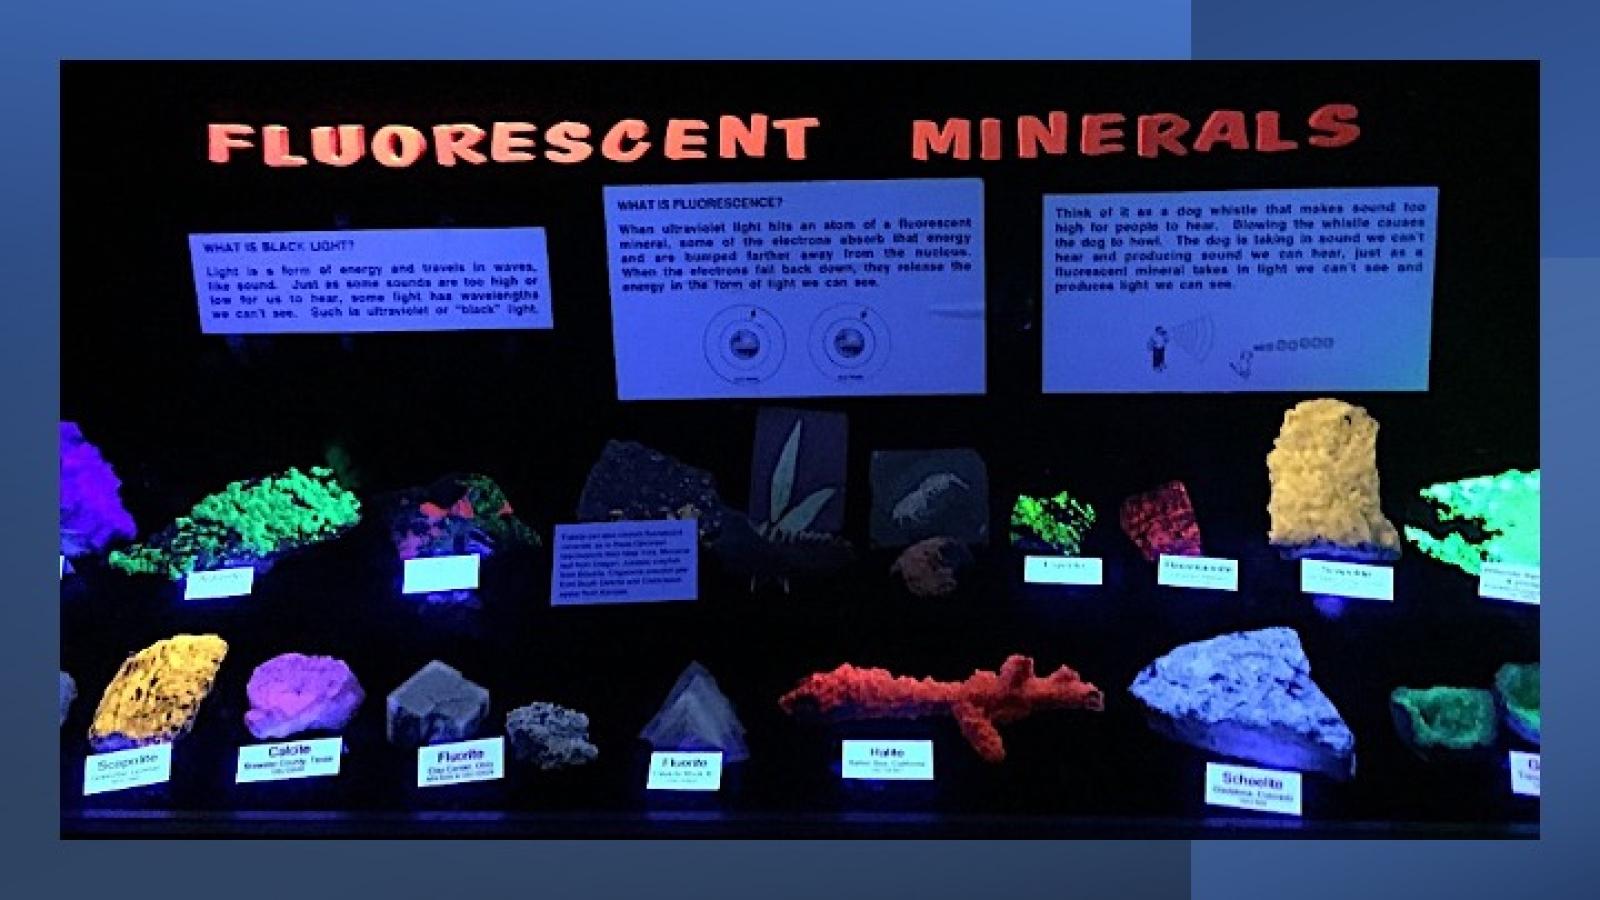 Fluorescent mineral display at the Orton Museum